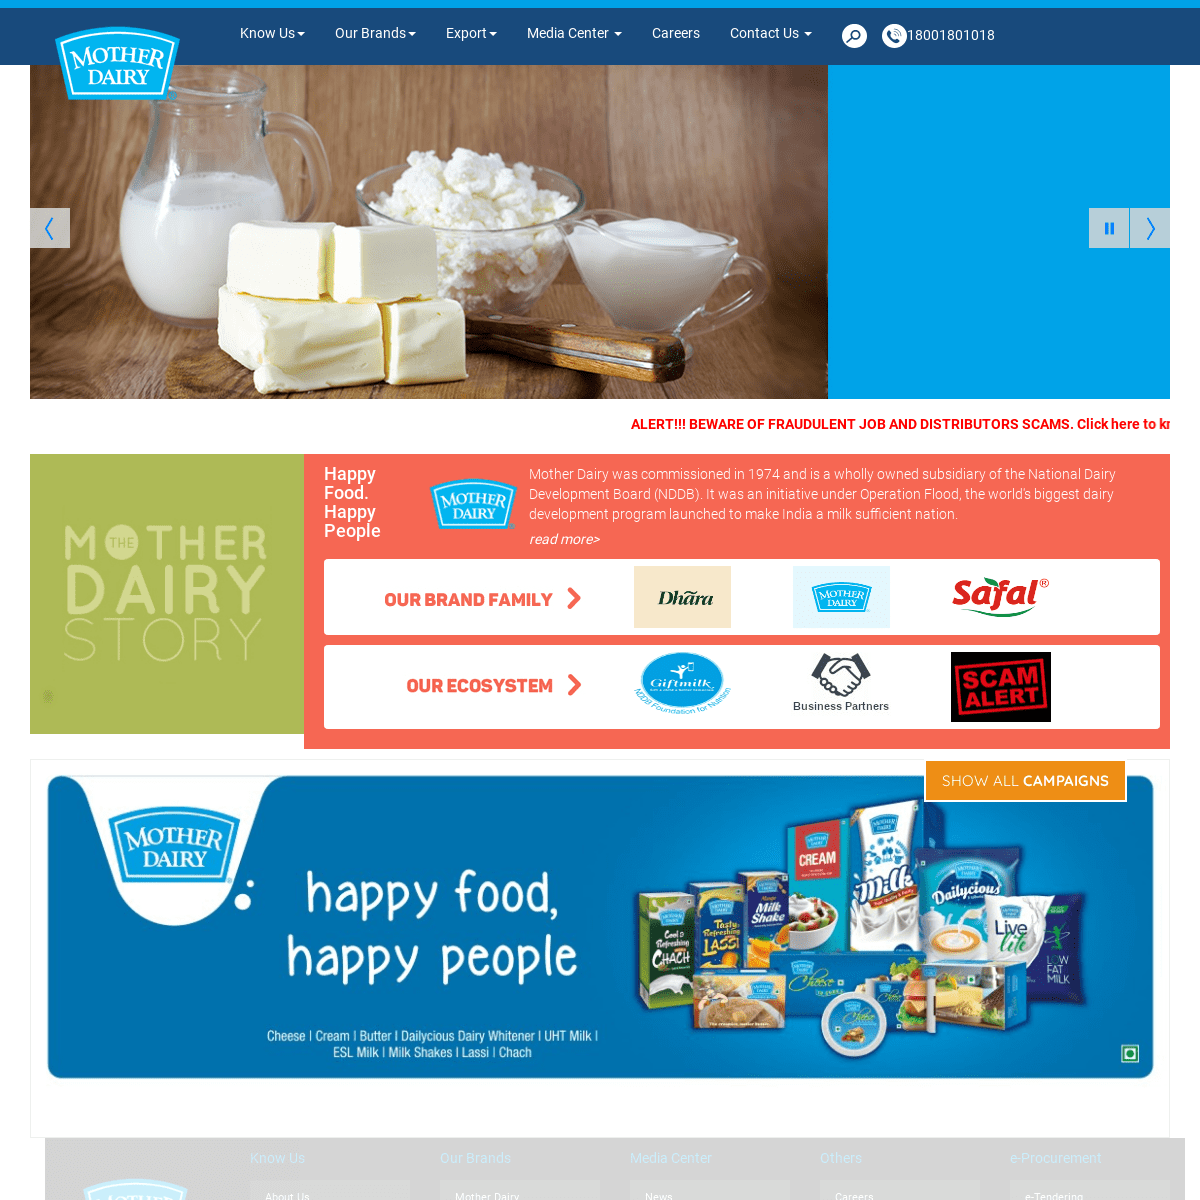 A complete backup of motherdairy.com